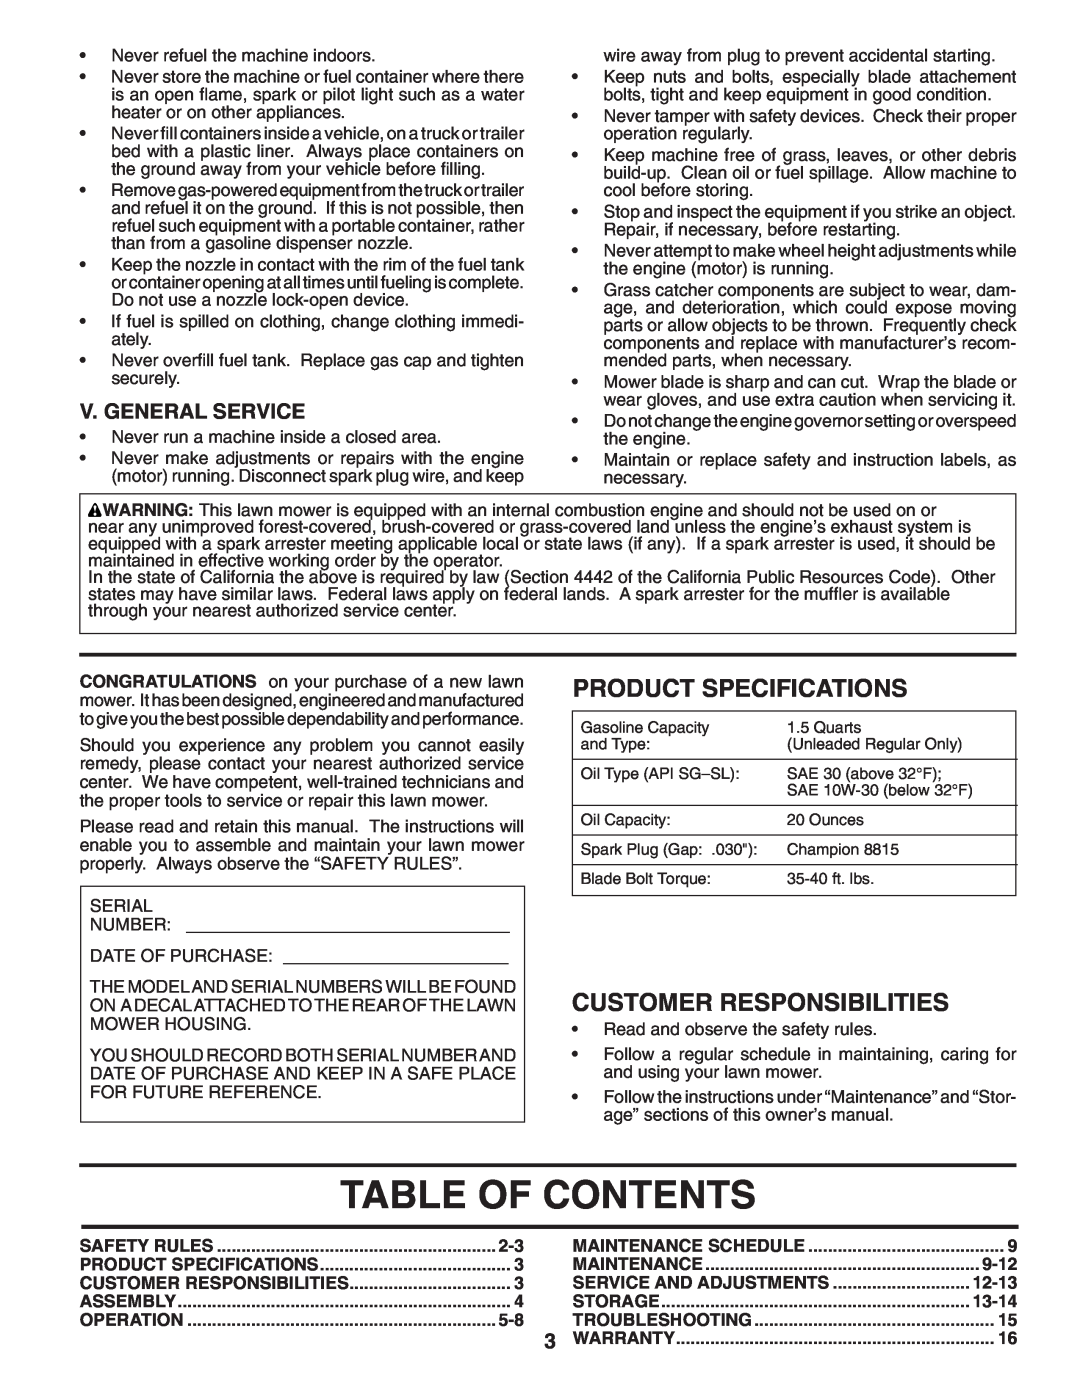 Husqvarna 6021P Table Of Contents, Product Specifications, Customer Responsibilities, V. General Service, 9-12, 12-13 